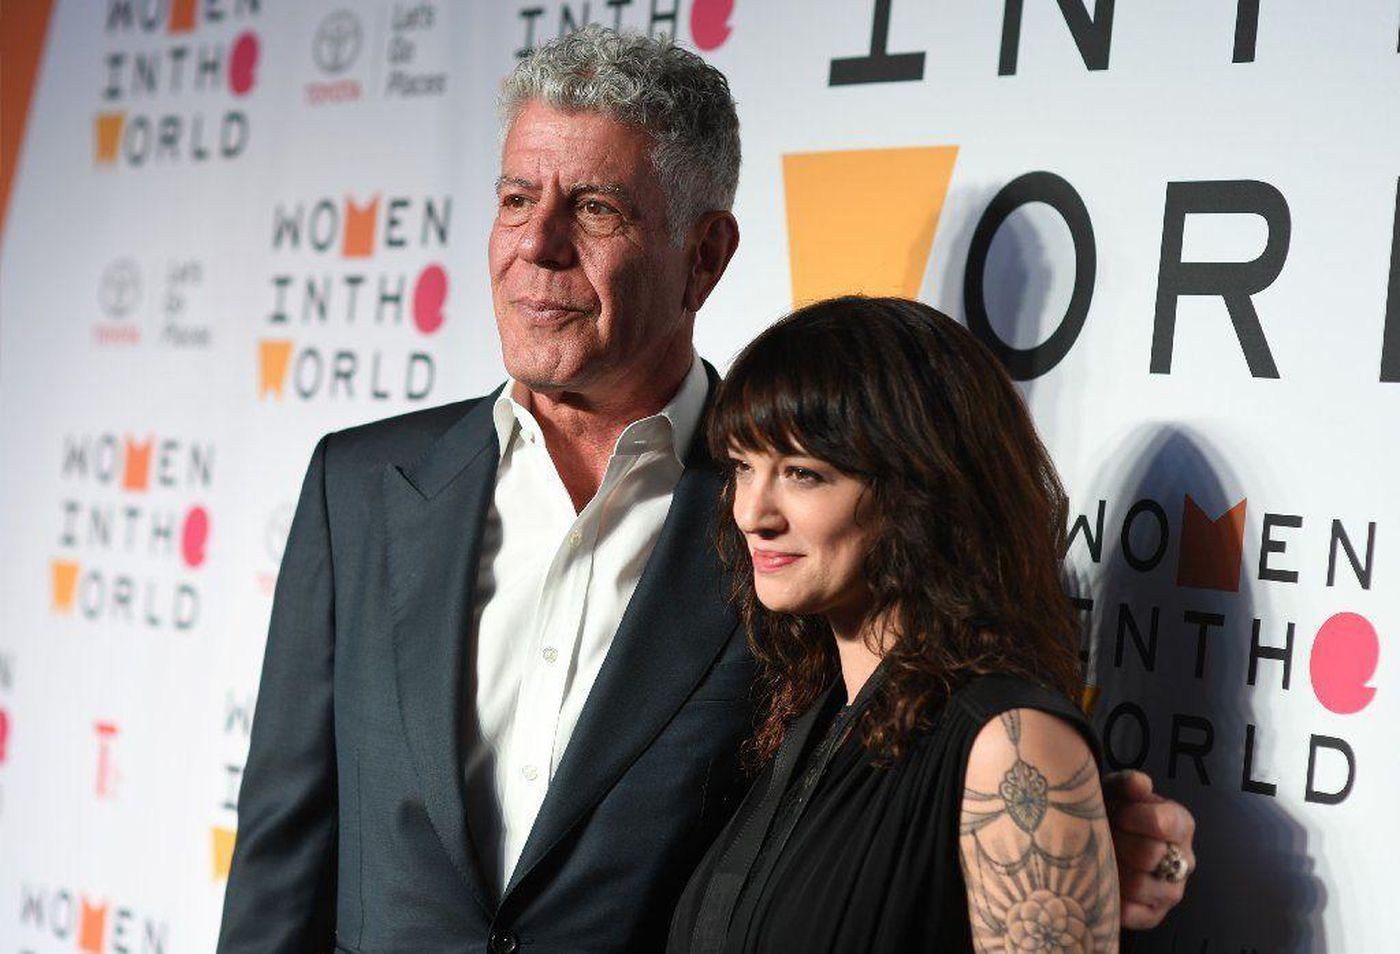 Asia Argento said she was "beyond devastated" by Anthony Bourdain's death.